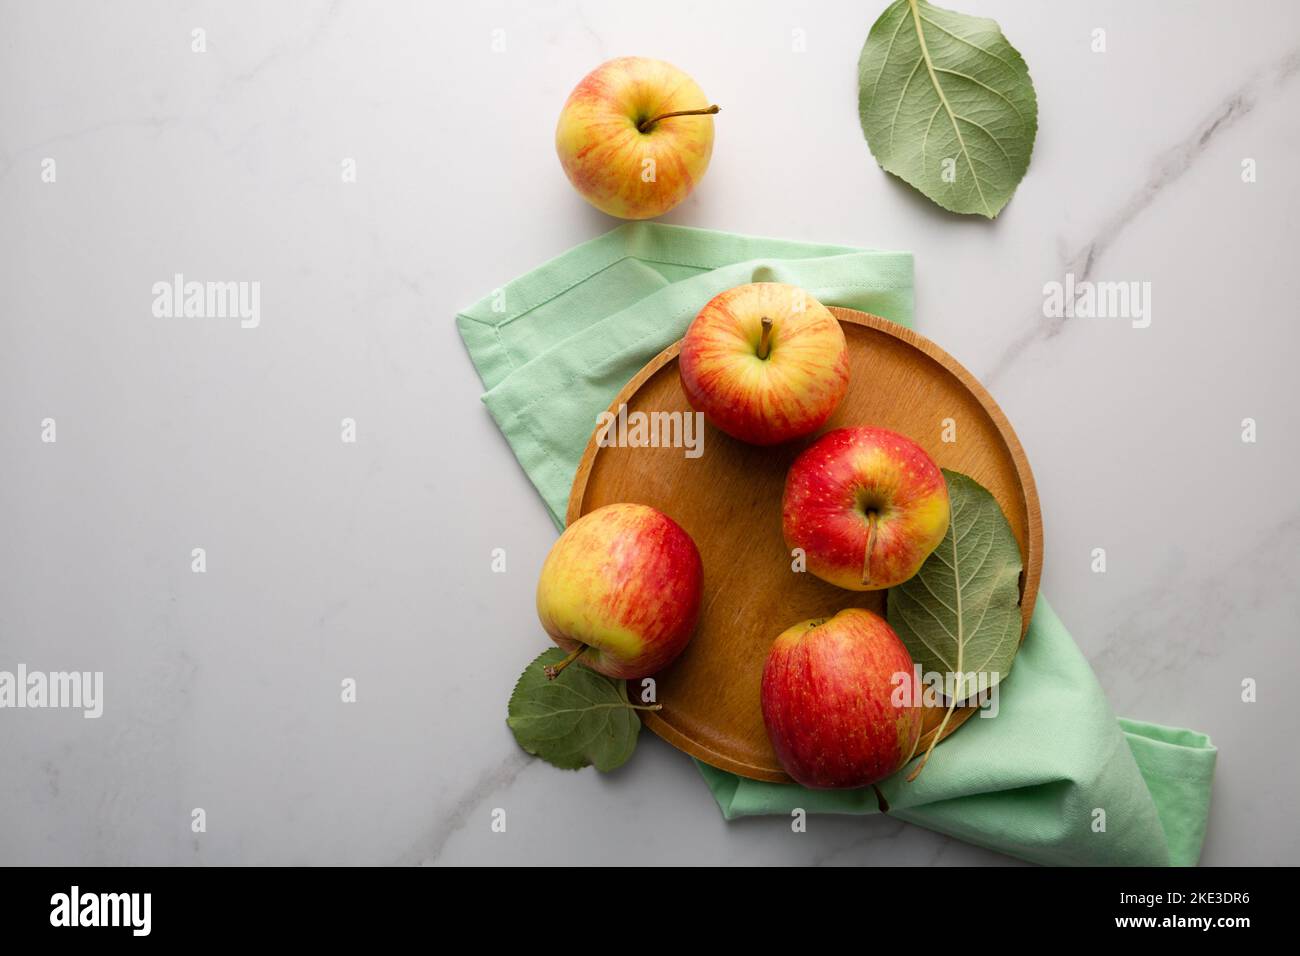 Overhead view of apples on light marble table food fruits copy space Stock Photo